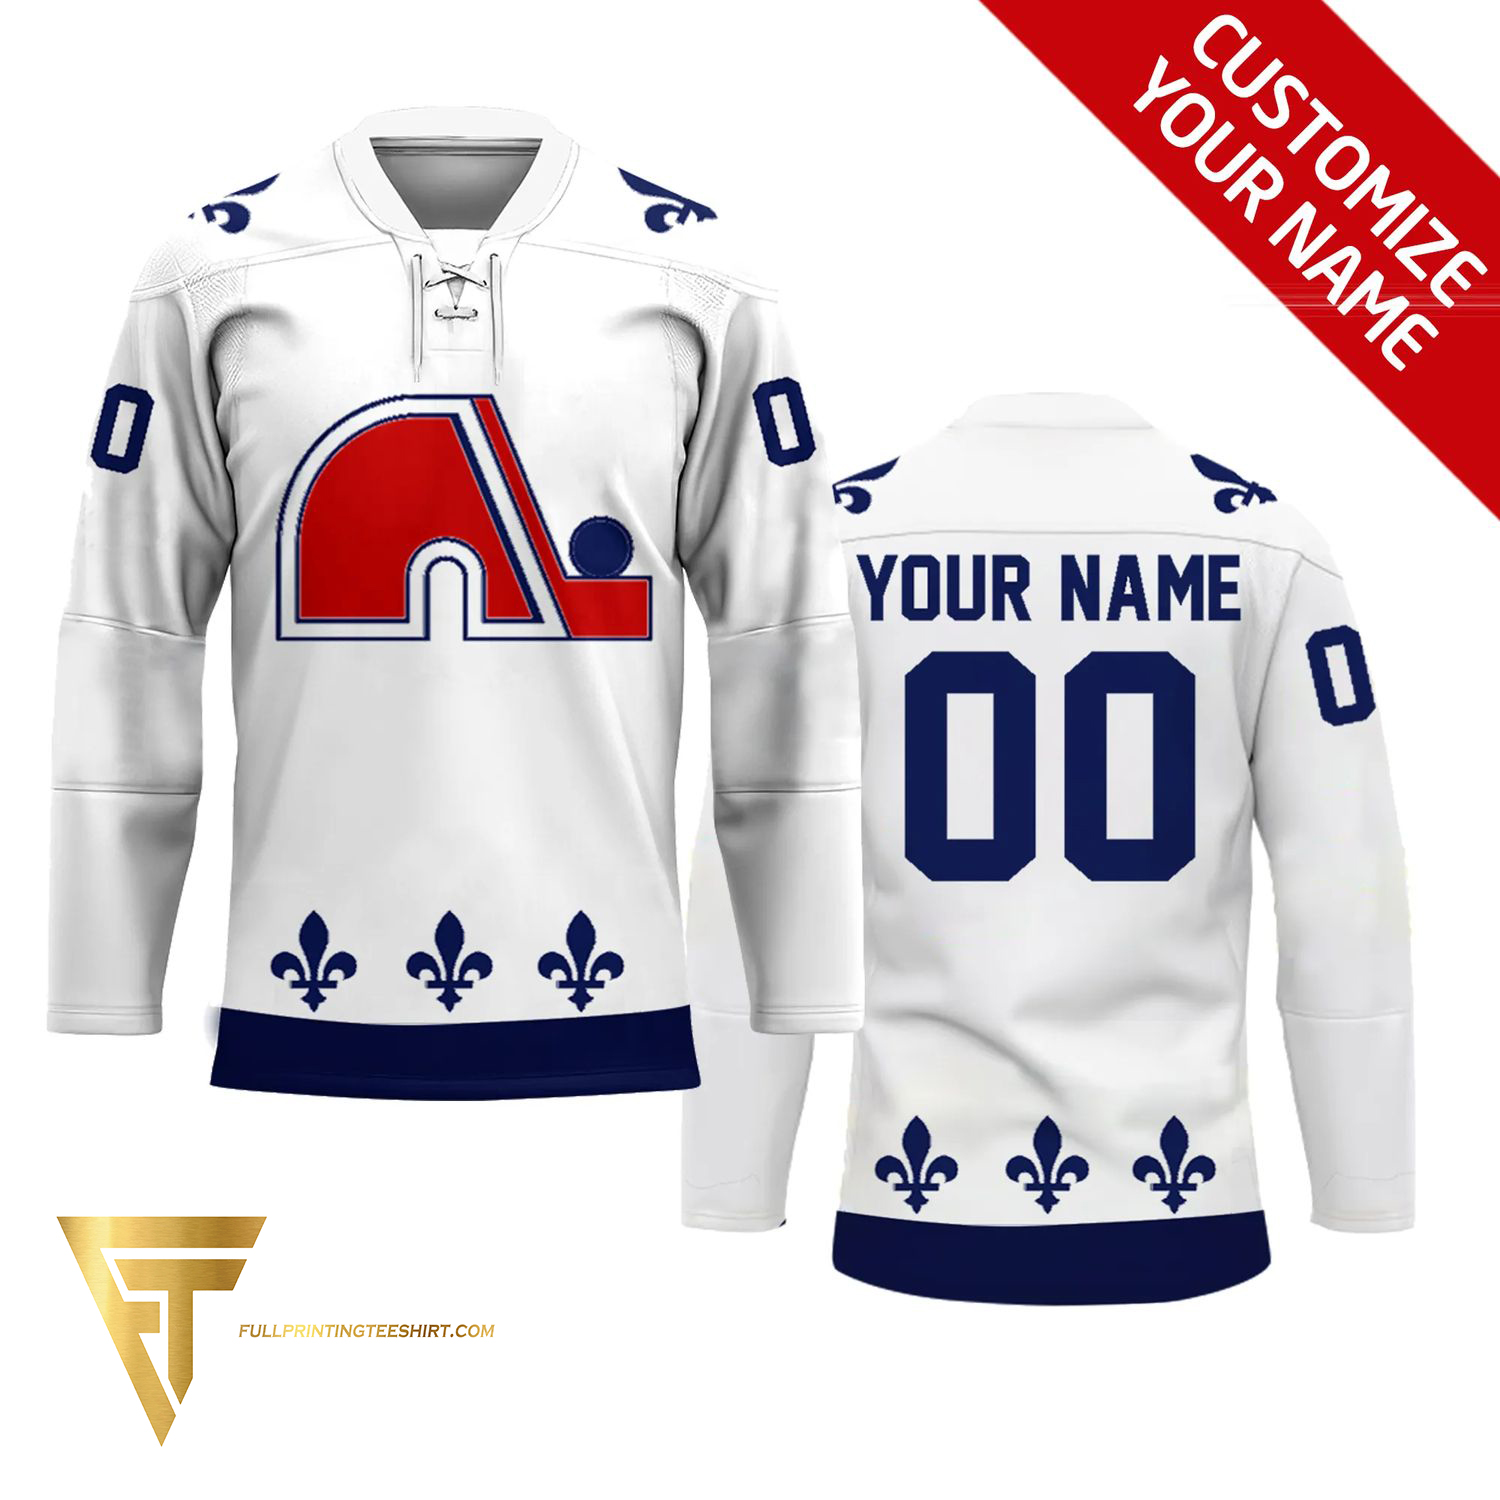 Another couple of custom jerseys for the Quebec Nordiques and the